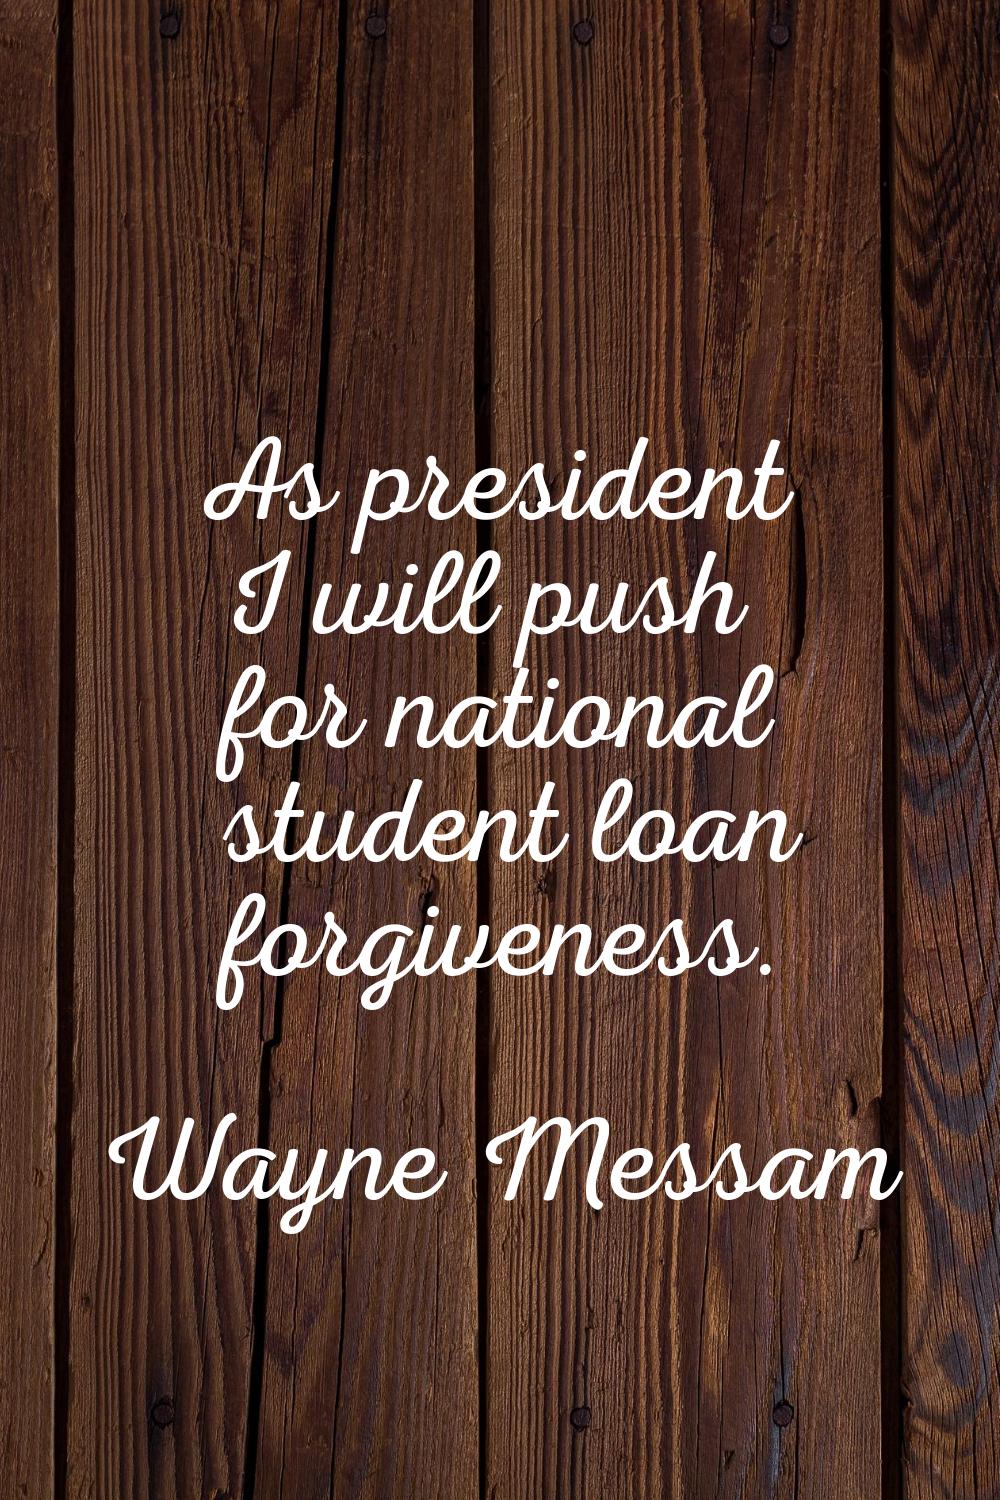 As president I will push for national student loan forgiveness.